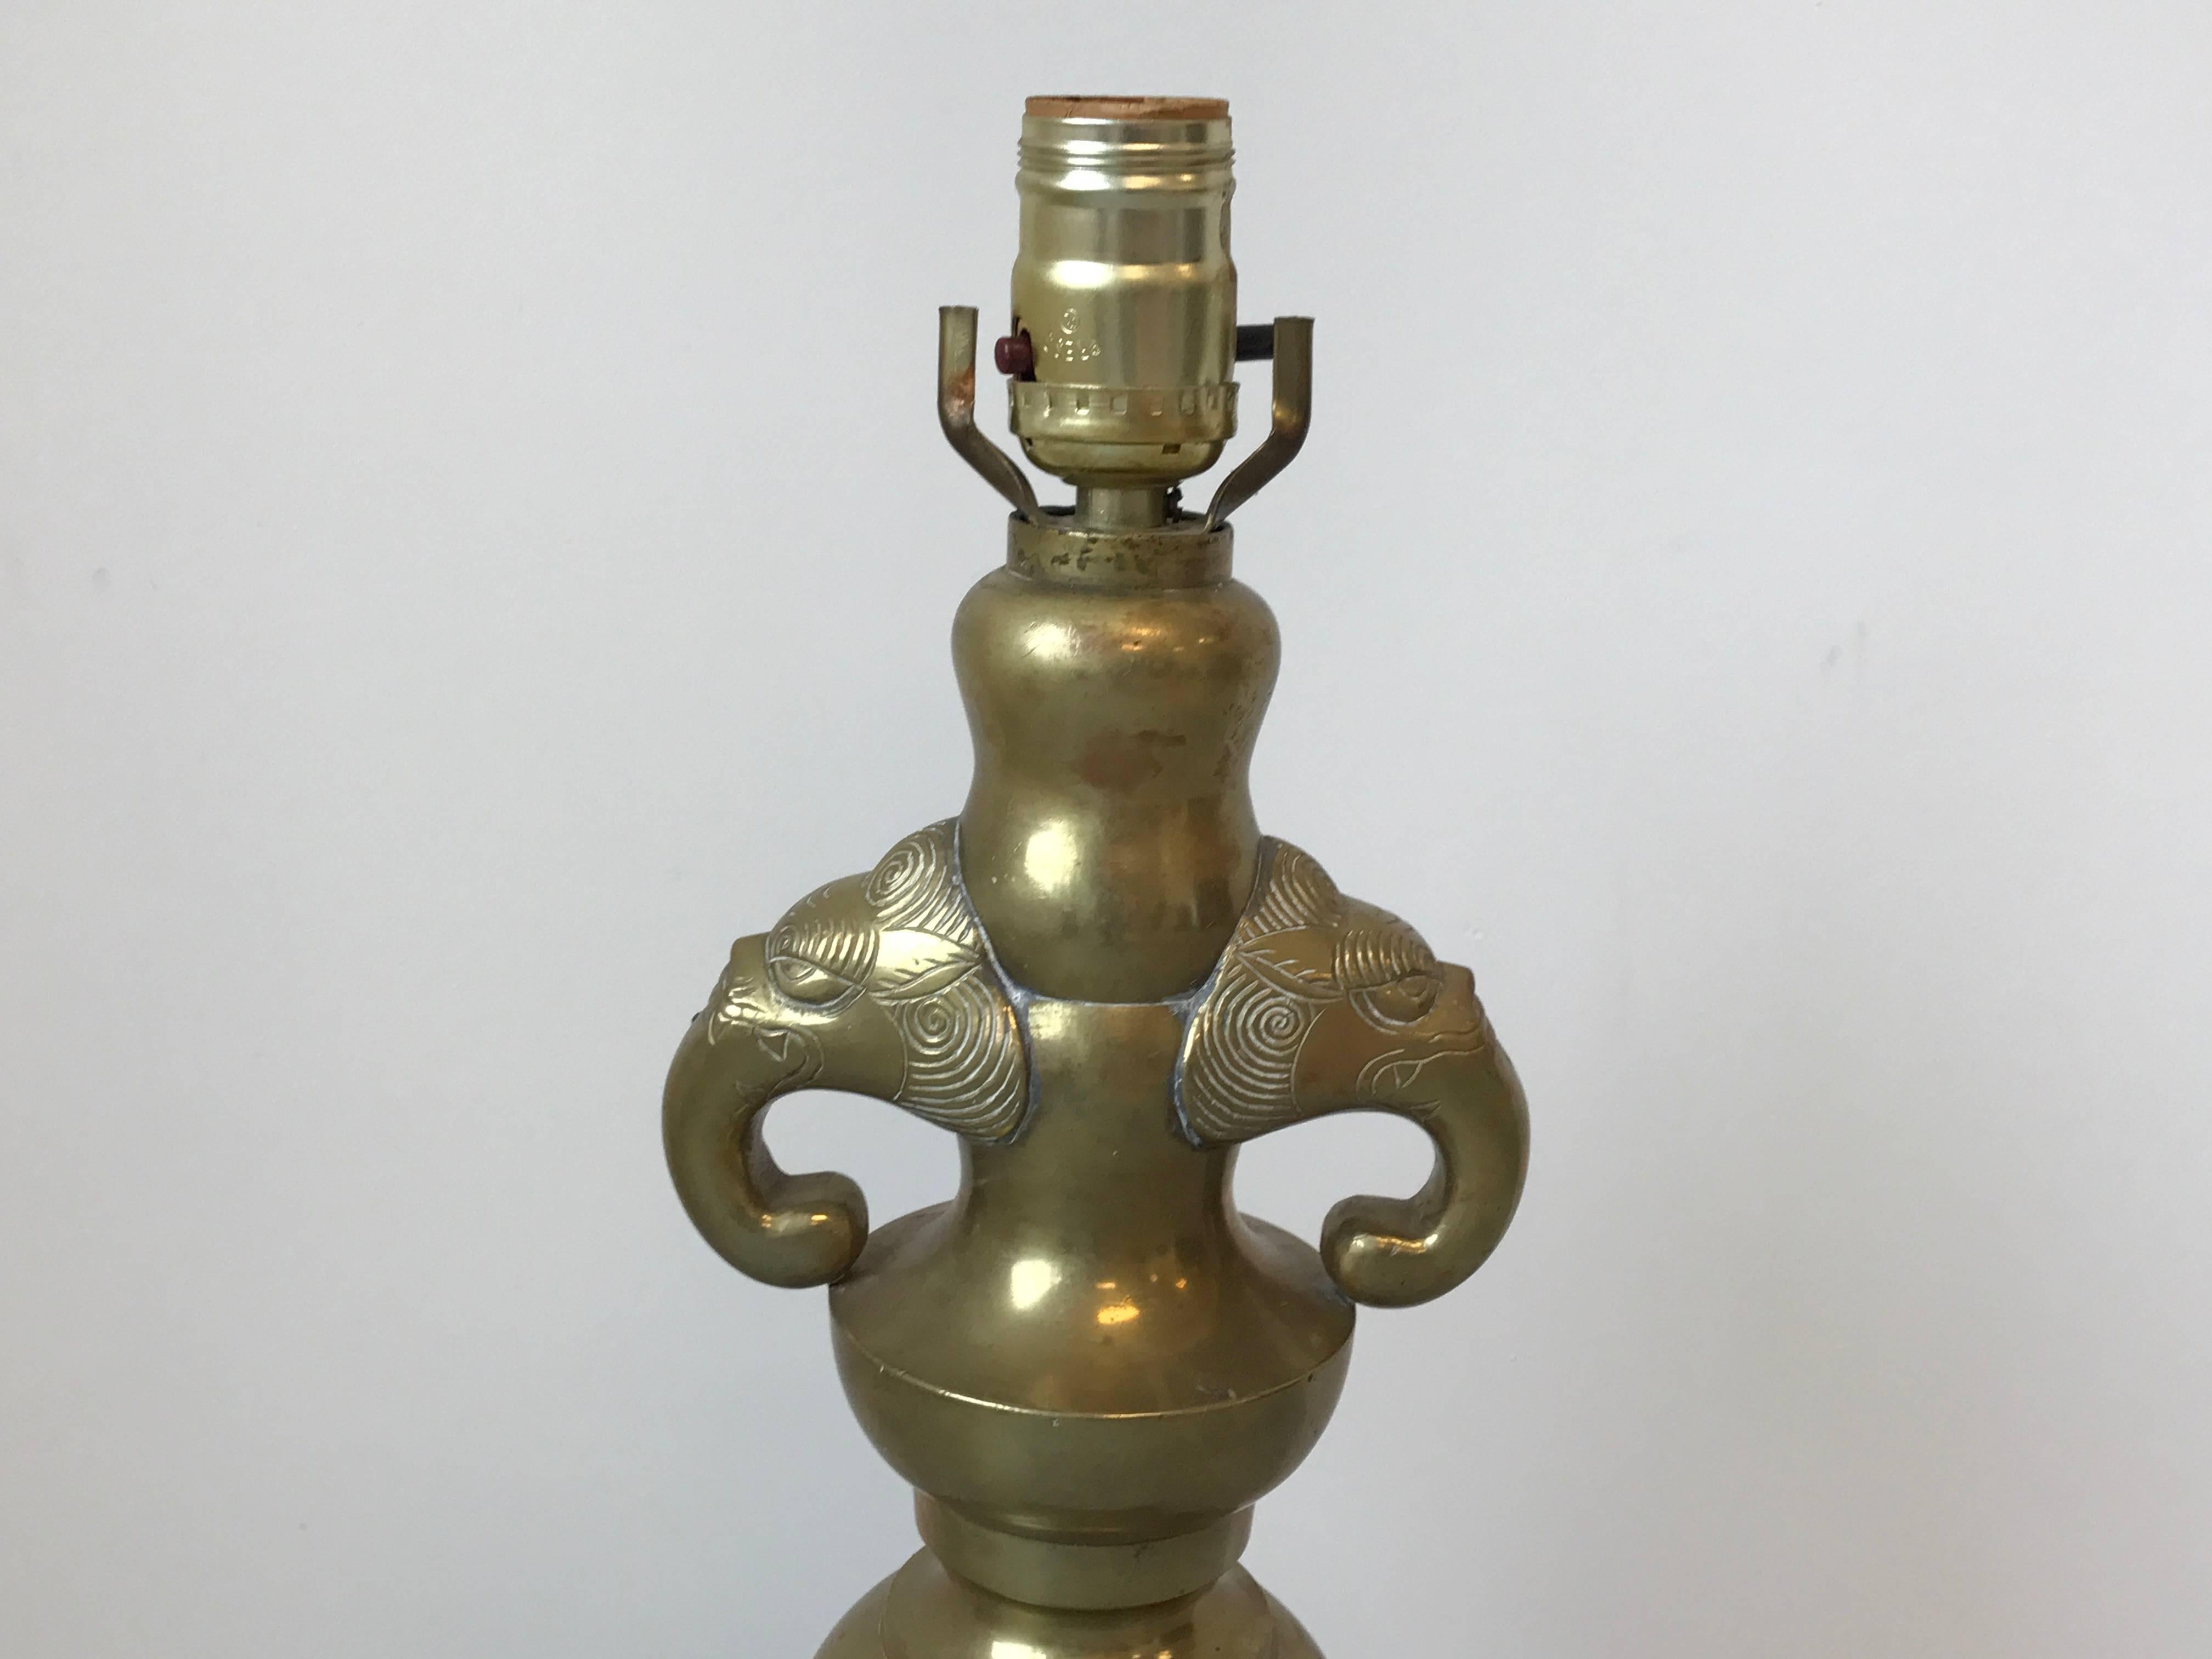 Offered is a beautiful, 1960s brass lamp with elephant head motif on a wooden base.